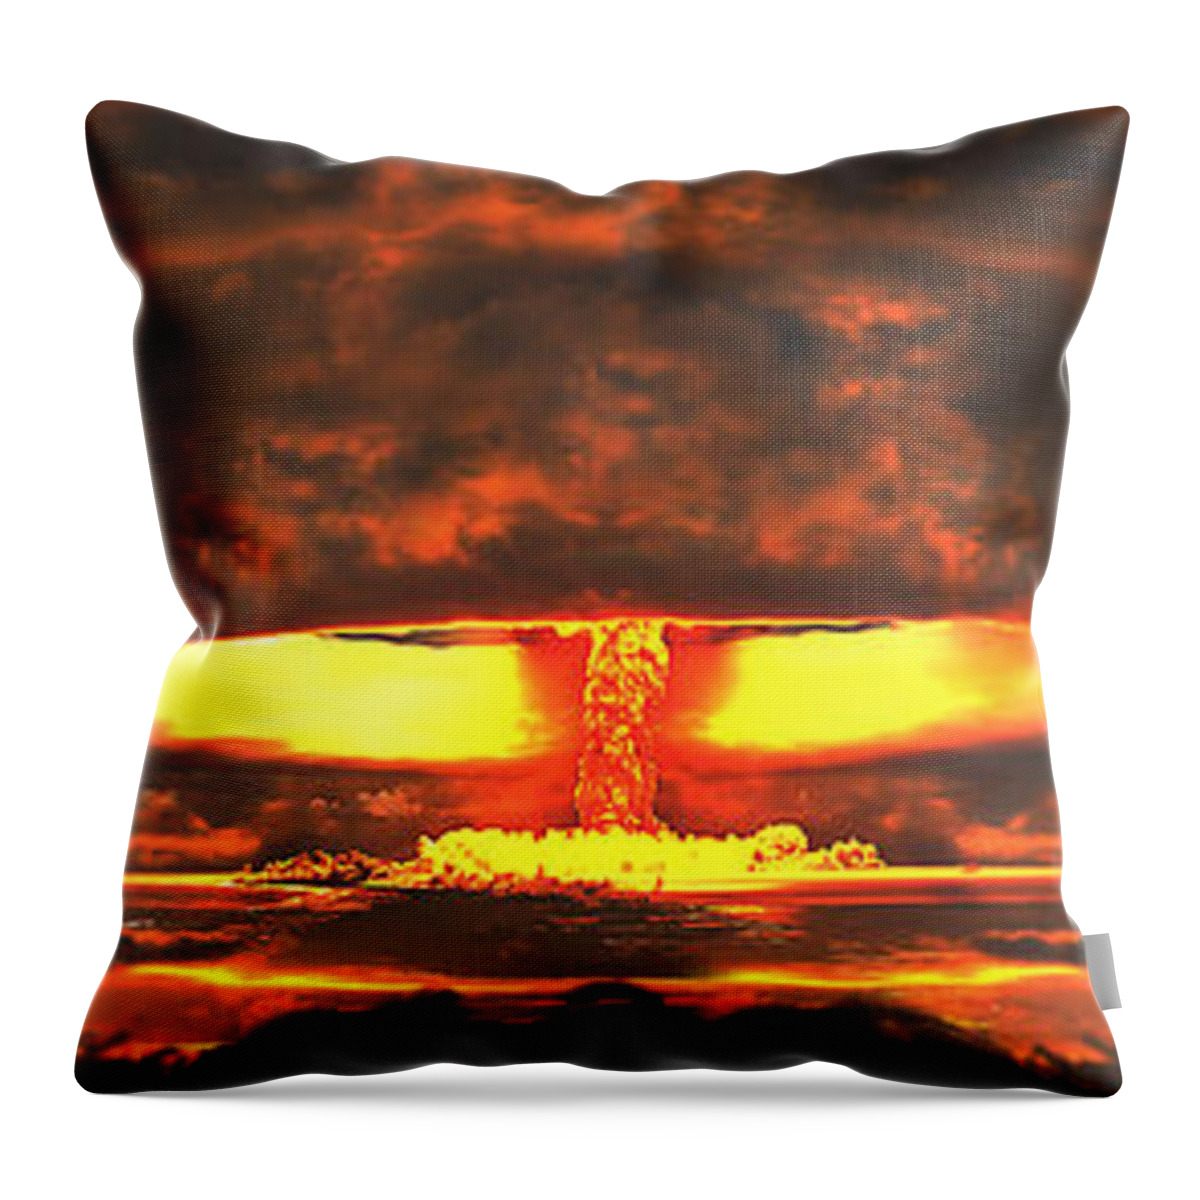 Photography Throw Pillow featuring the photograph Nuclear Explosion by Panoramic Images